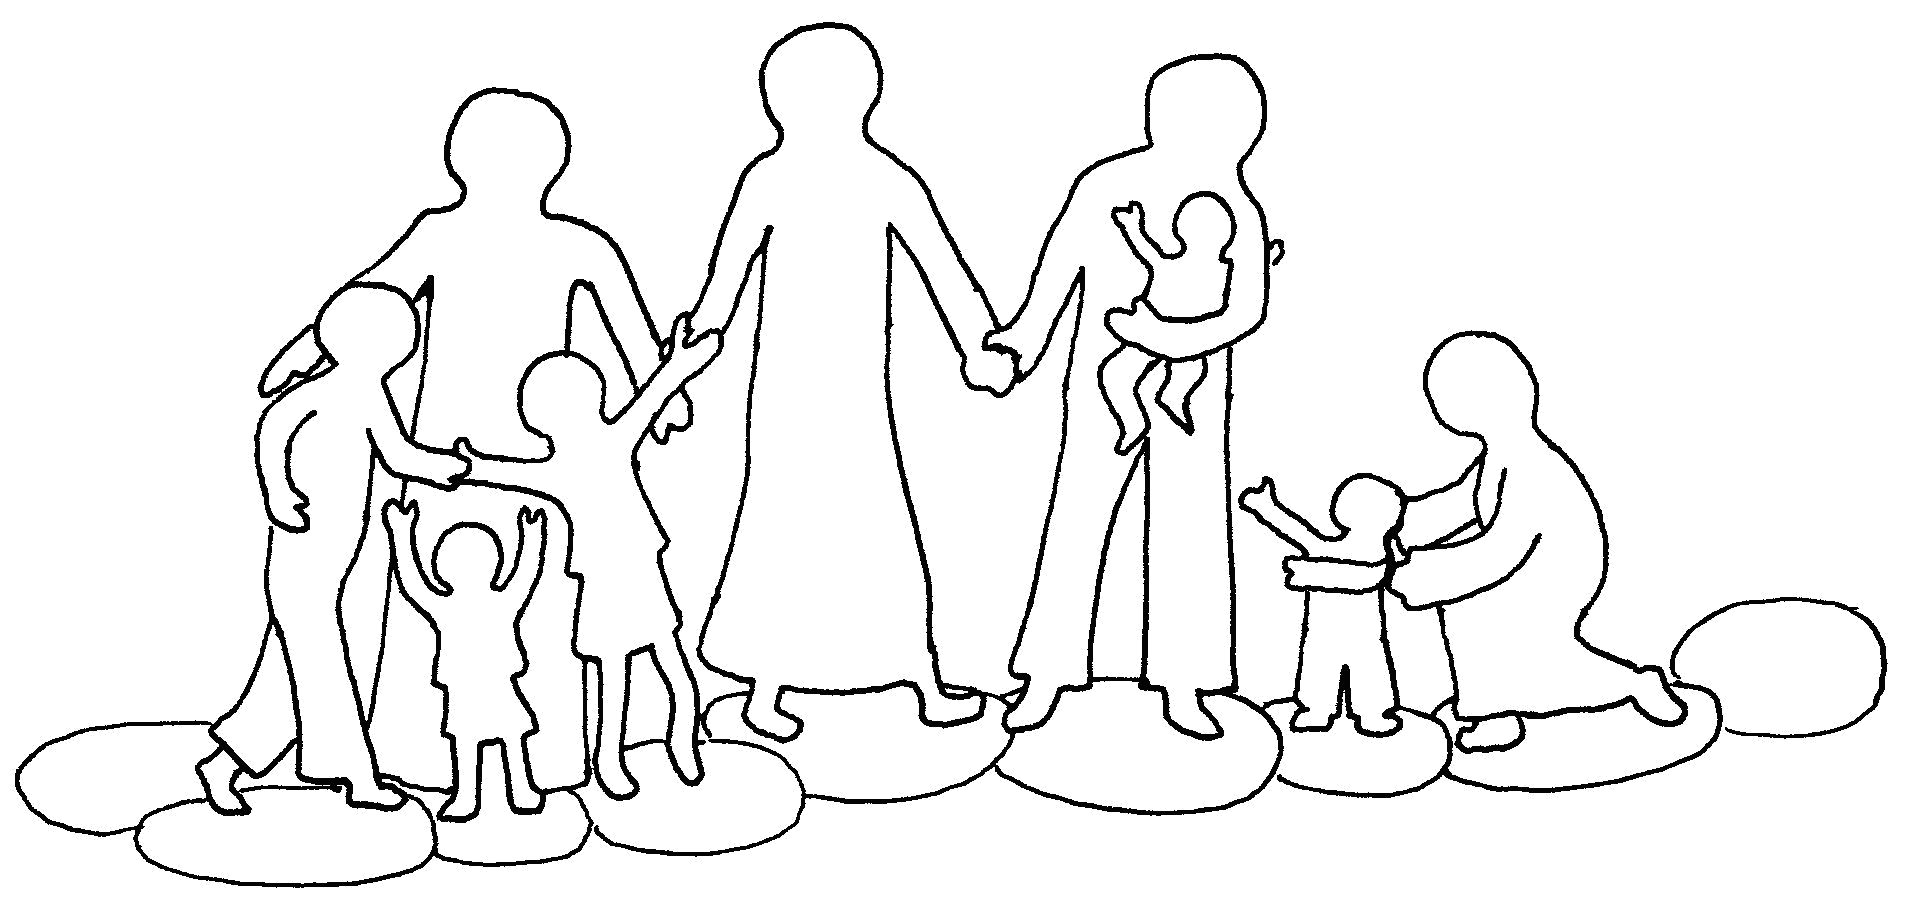 Family Group